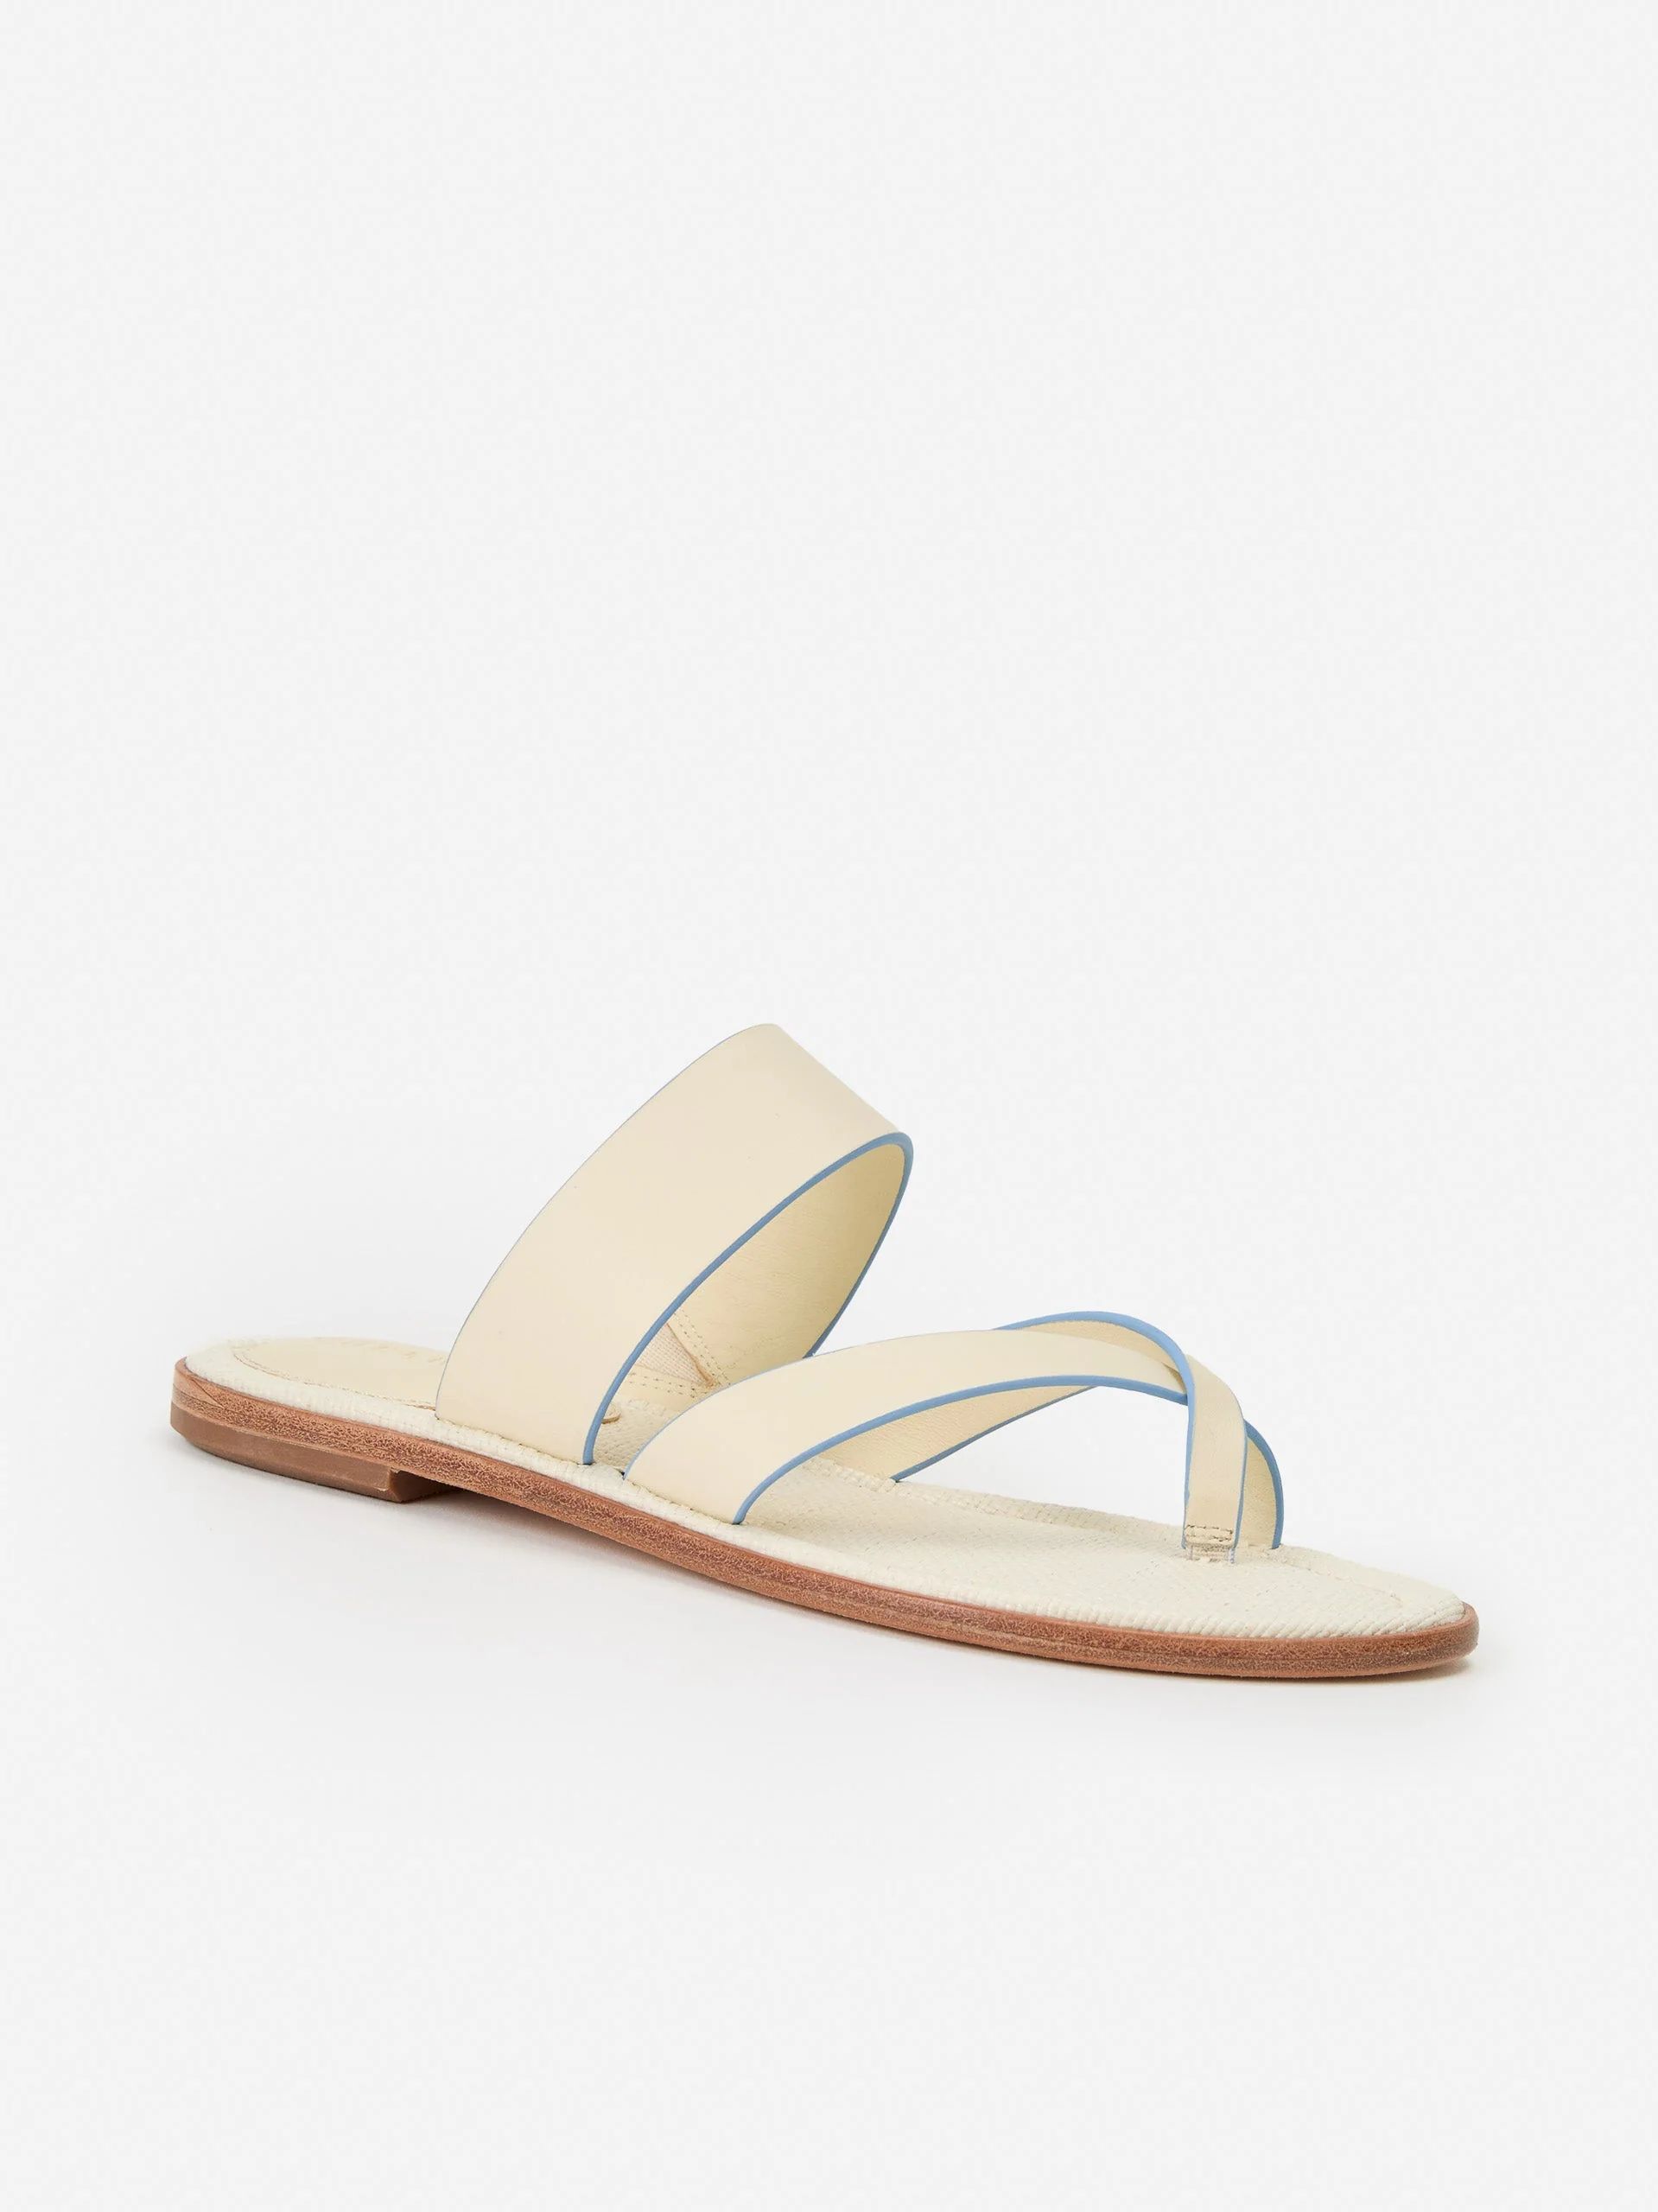 Shay Leather Sandals | J.McLaughlin